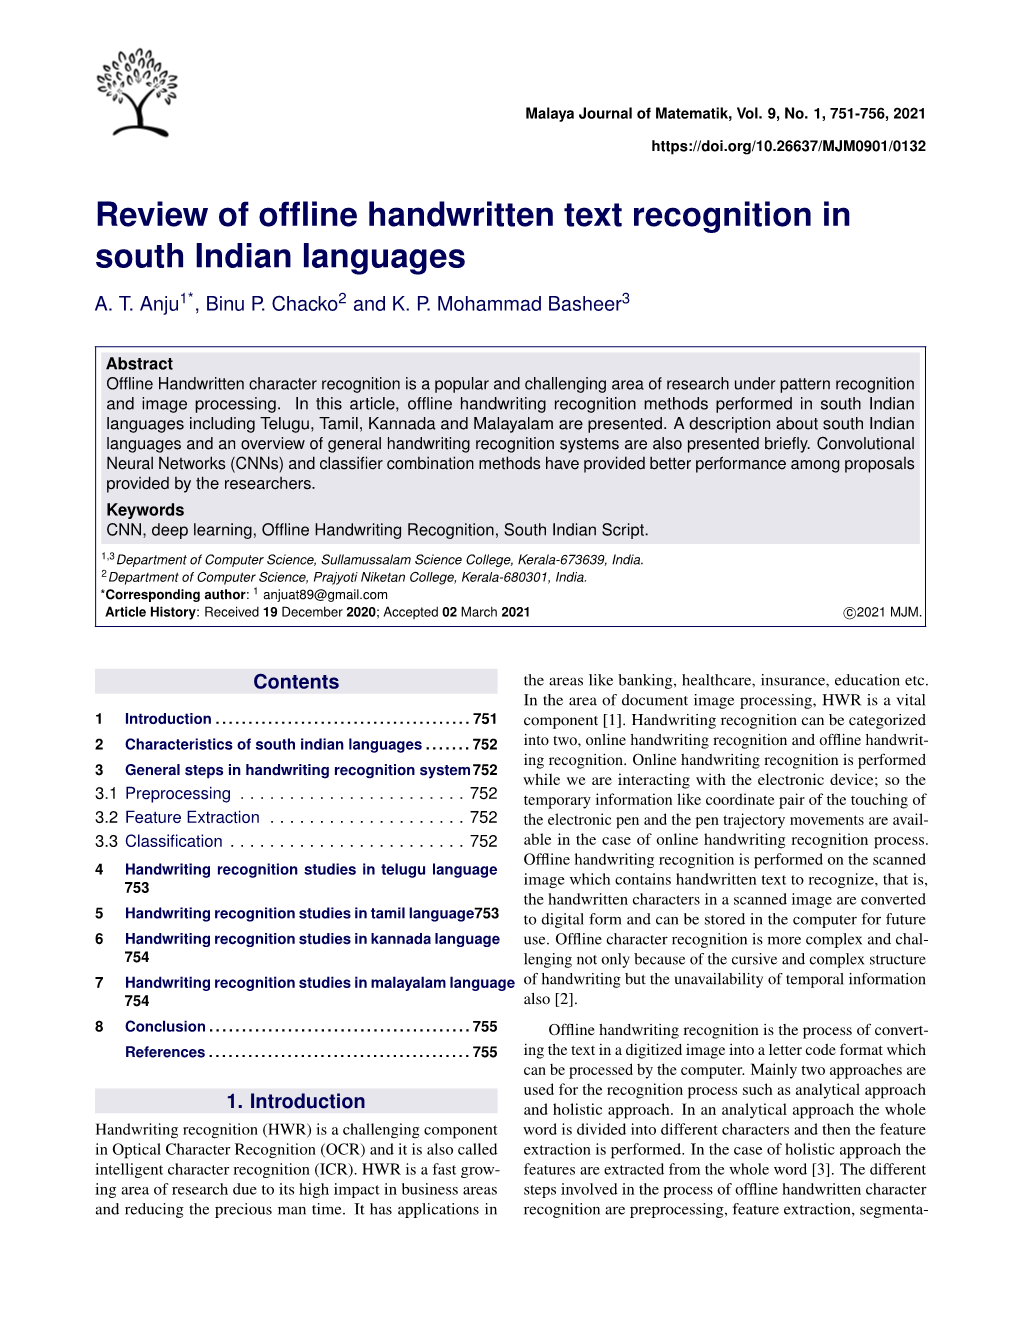 Review of Offline Handwritten Text Recognition in South Indian Languages